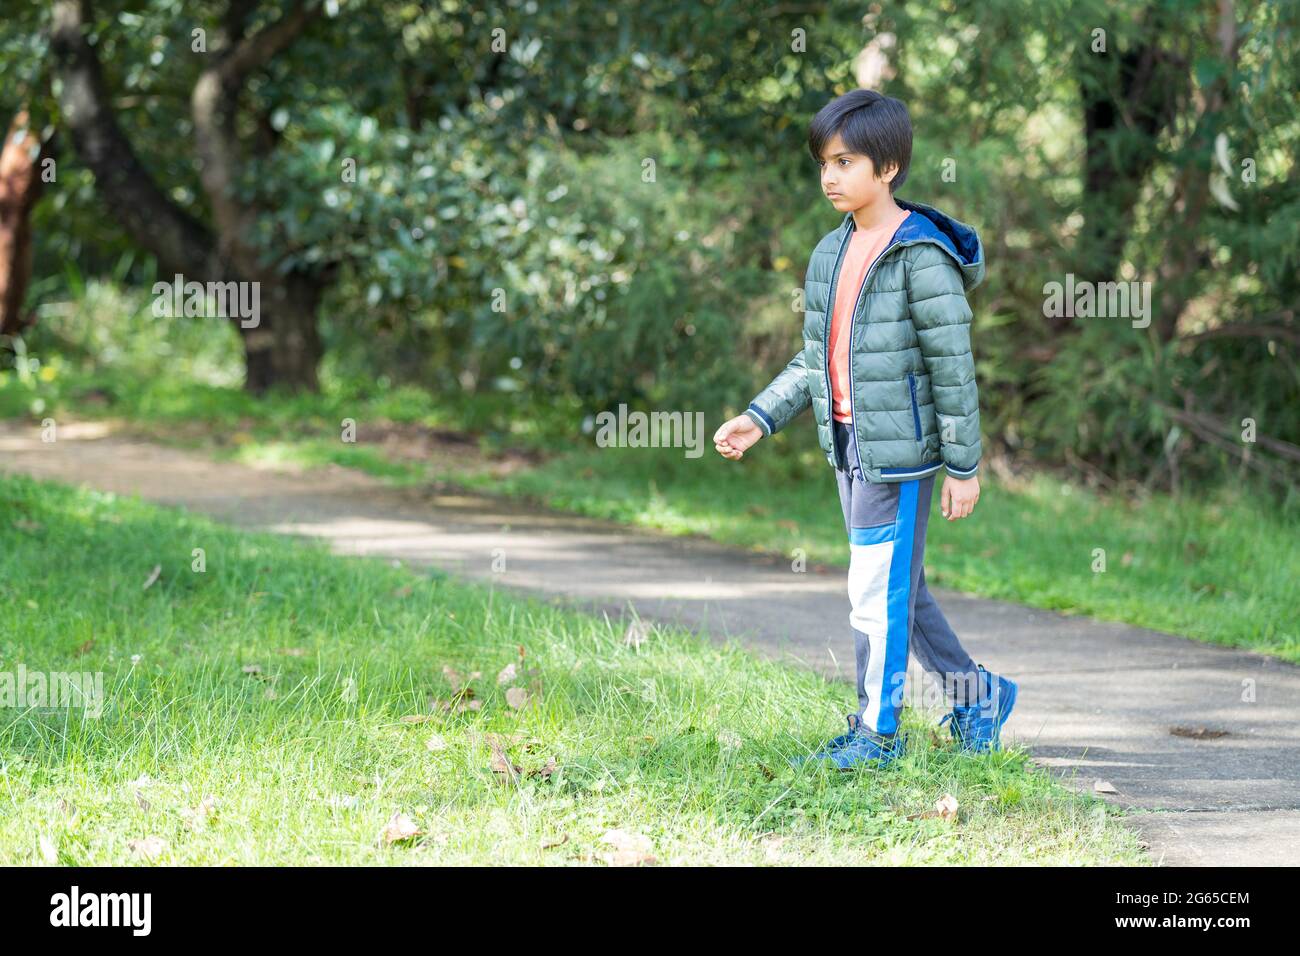 Portrait of kid walking in the park in sunlight. Greenery in the background. Stock Photo